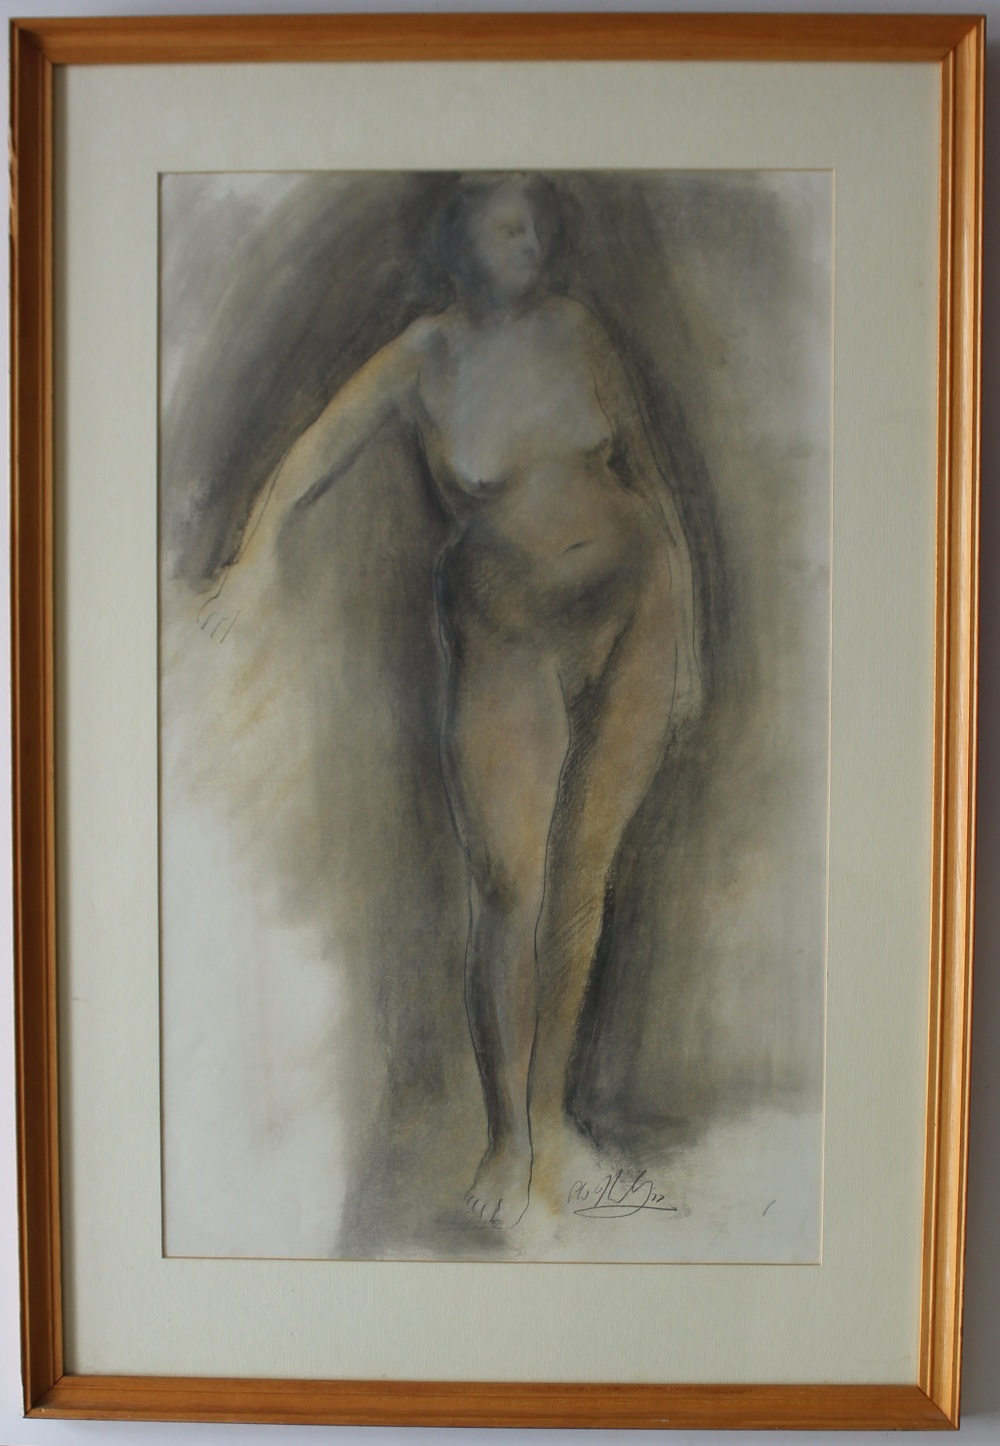 Peter William Nicholas
Nude study
Watercolour
Initialled and dated '77
56 x 34cm

***ARTISTS - Image 2 of 4